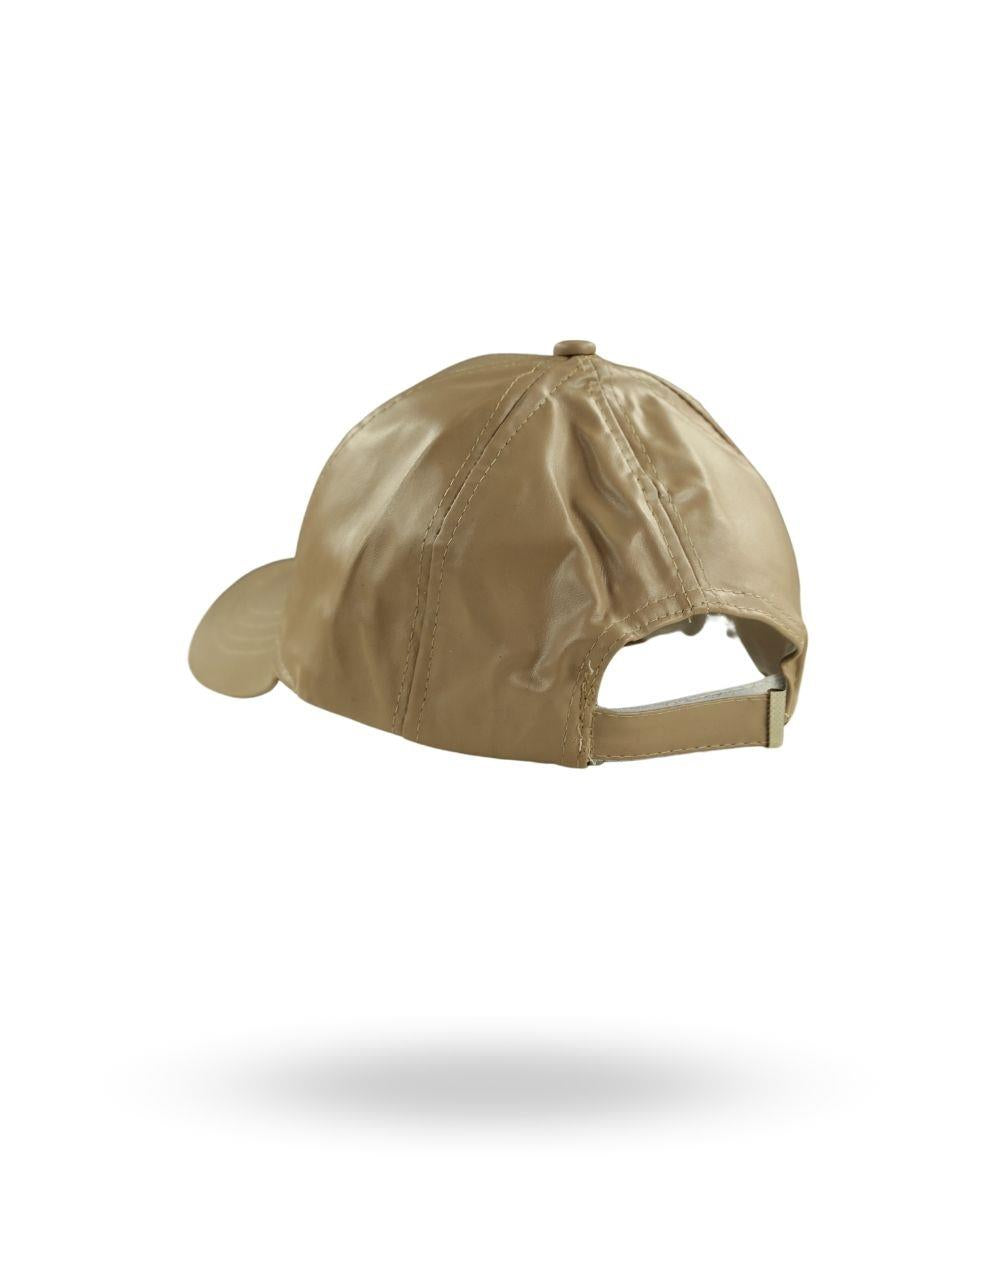 Basic Leather Covered Street Style Hat Bronze - STREETMODE ™